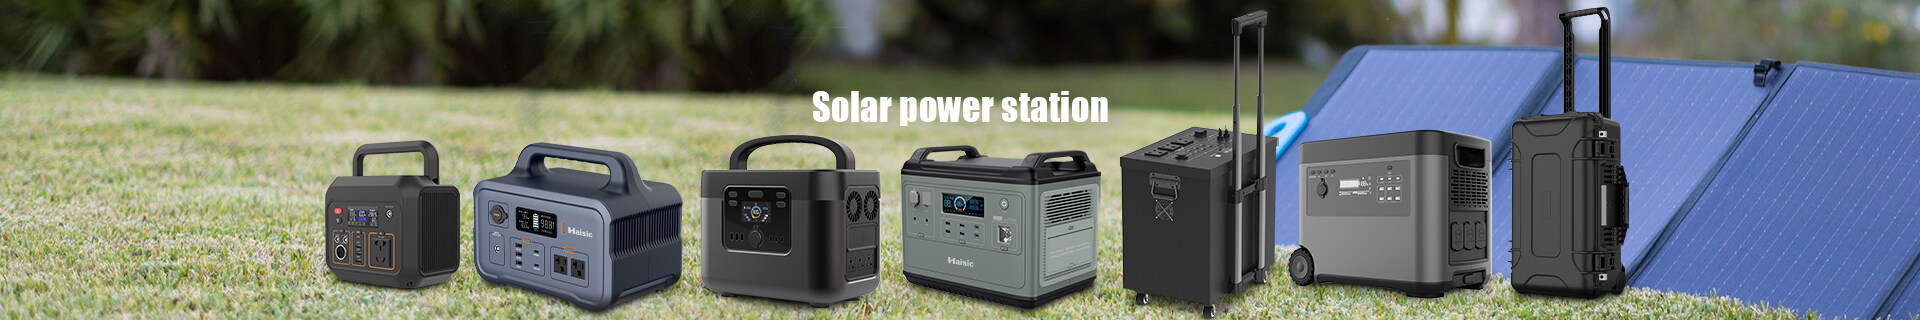 portable battery manufacturers, portable battery operated power supply